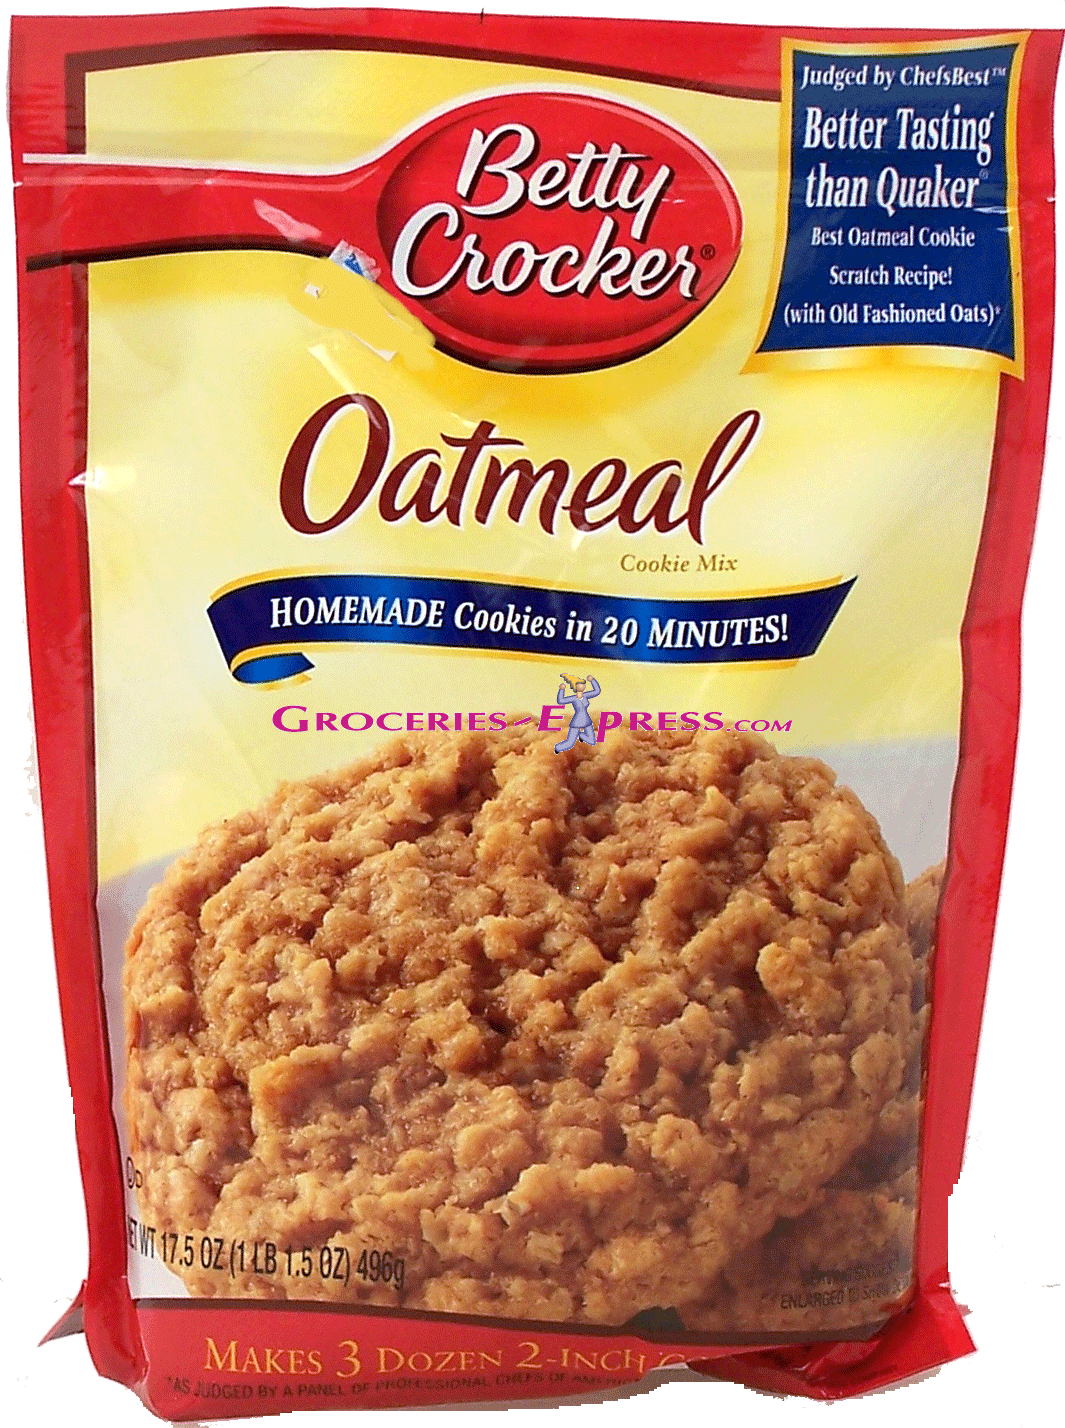 Betty Crocker  oatmeal cookie mix, makes 3 dozen 2-inch cookies Full-Size Picture